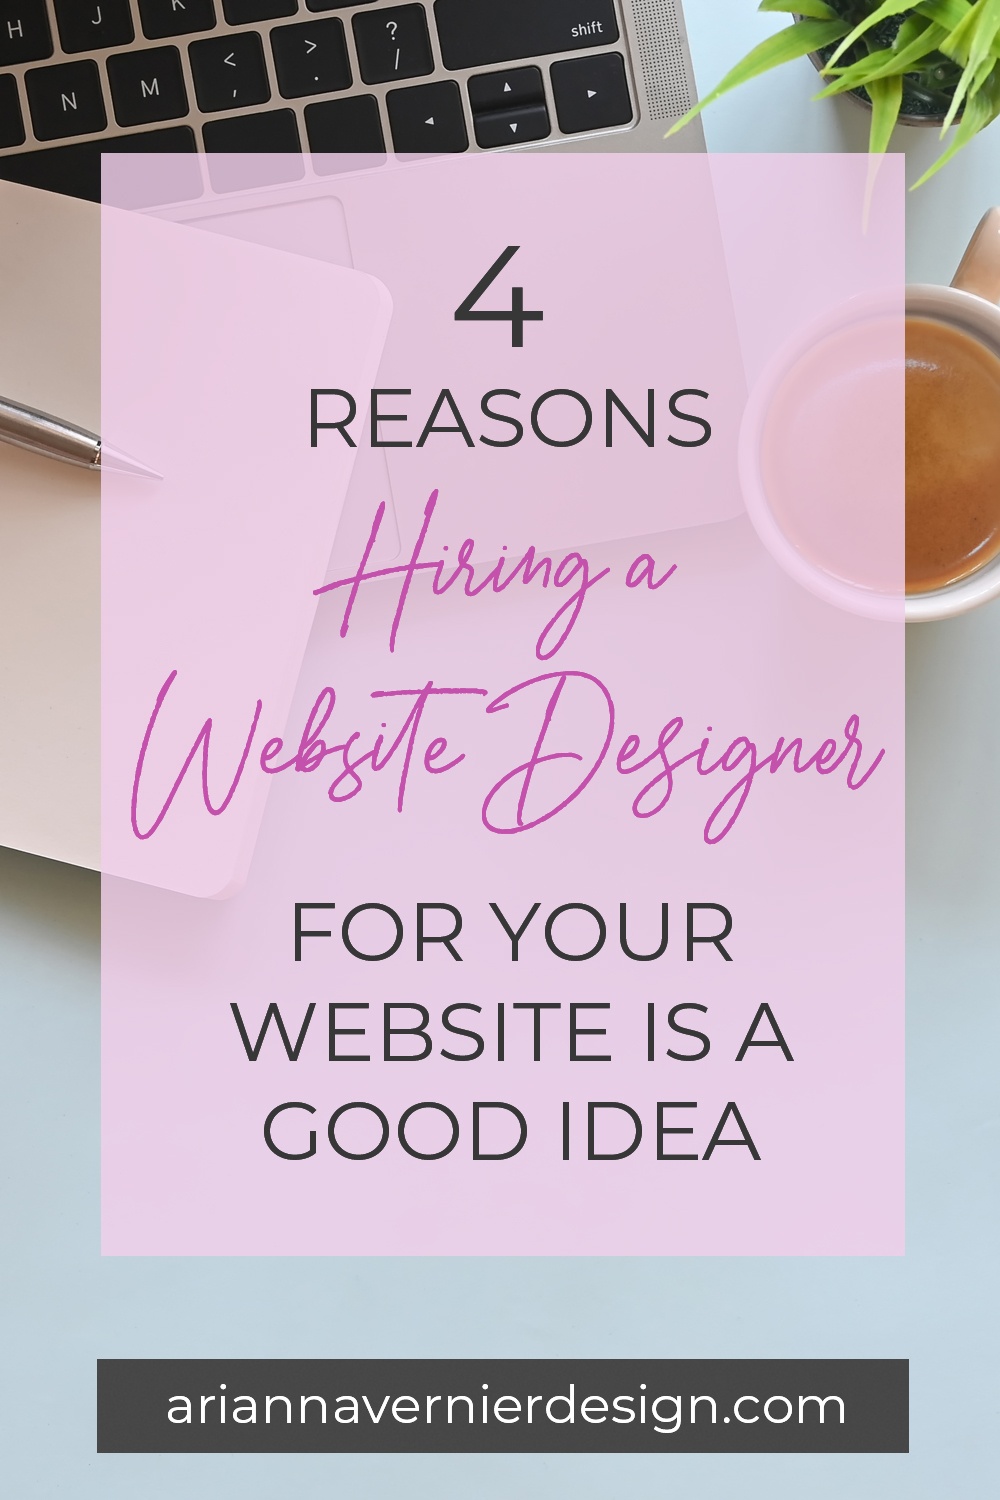 Pinterest pin with a coffee and notebook in the background, with a light purple rectangle over top, and the title "4 Reasons Hiring a Website Designer for Your Website is a Good Idea"